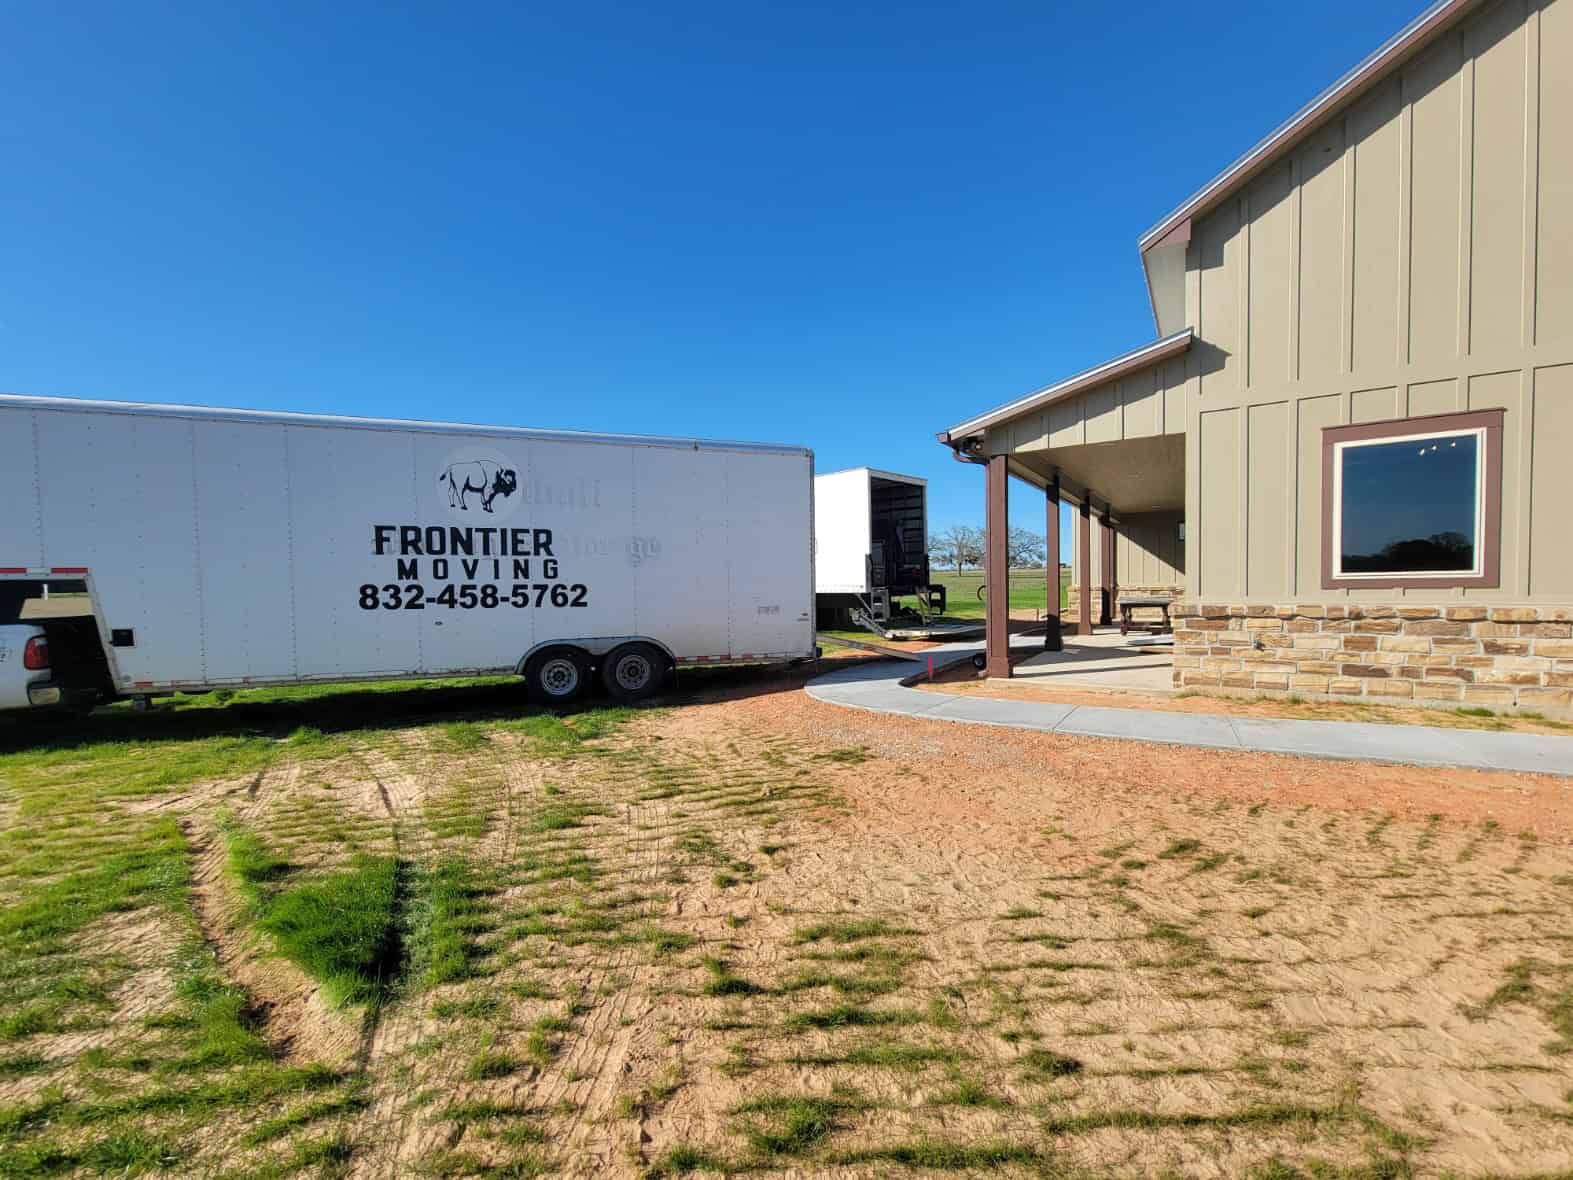 Tomball Moving Company - Frontier Moving, LLC